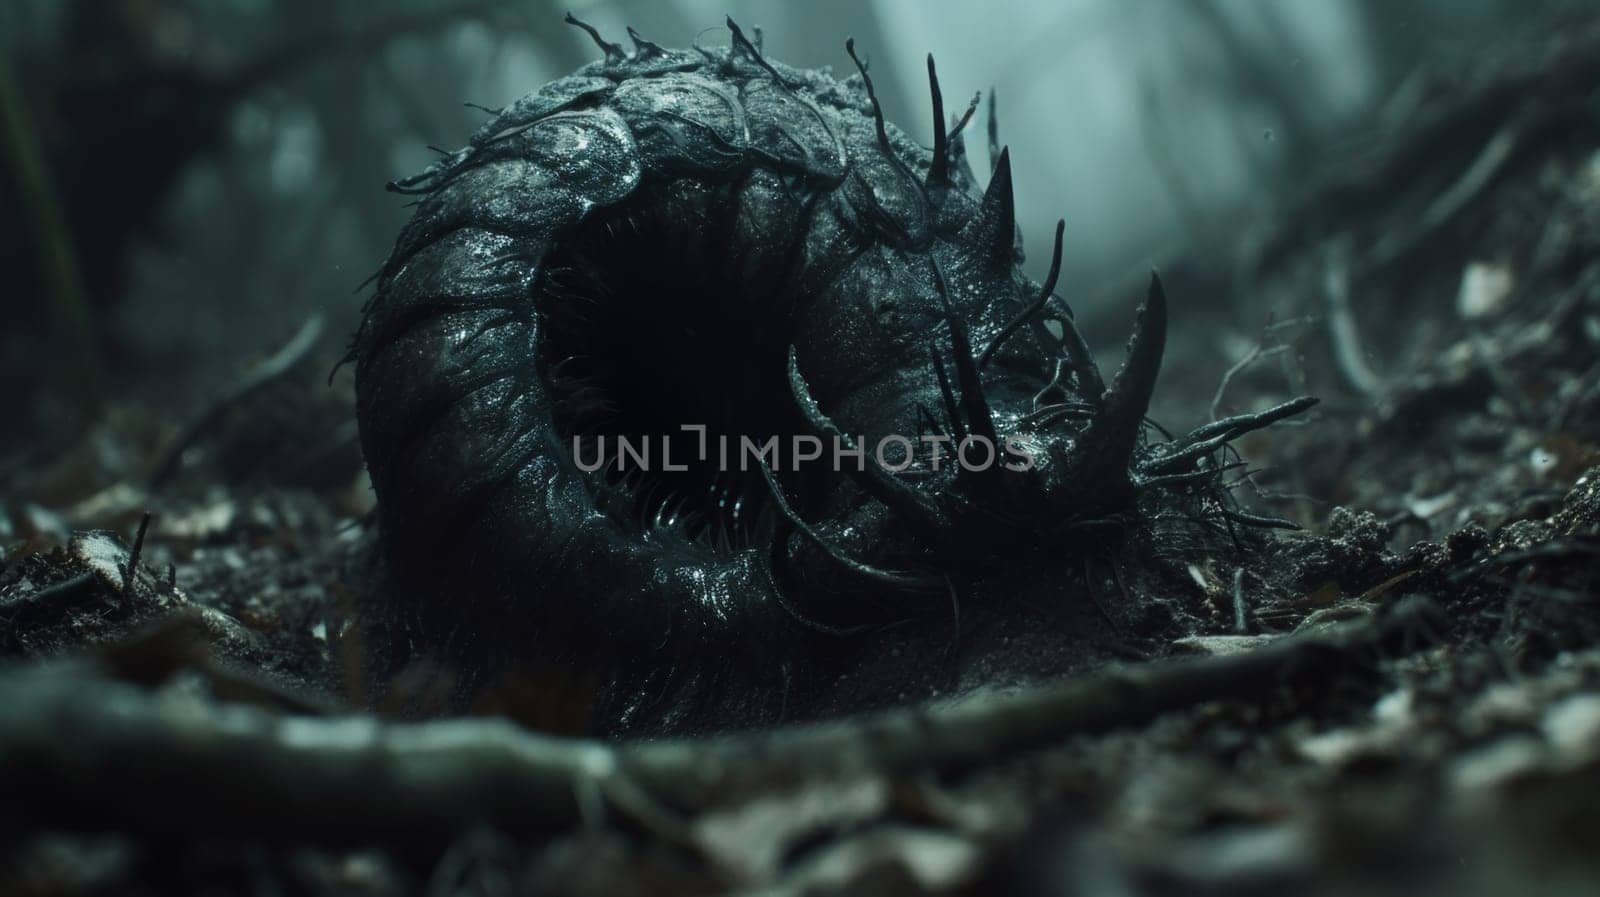 A close up of a large black creature in the woods